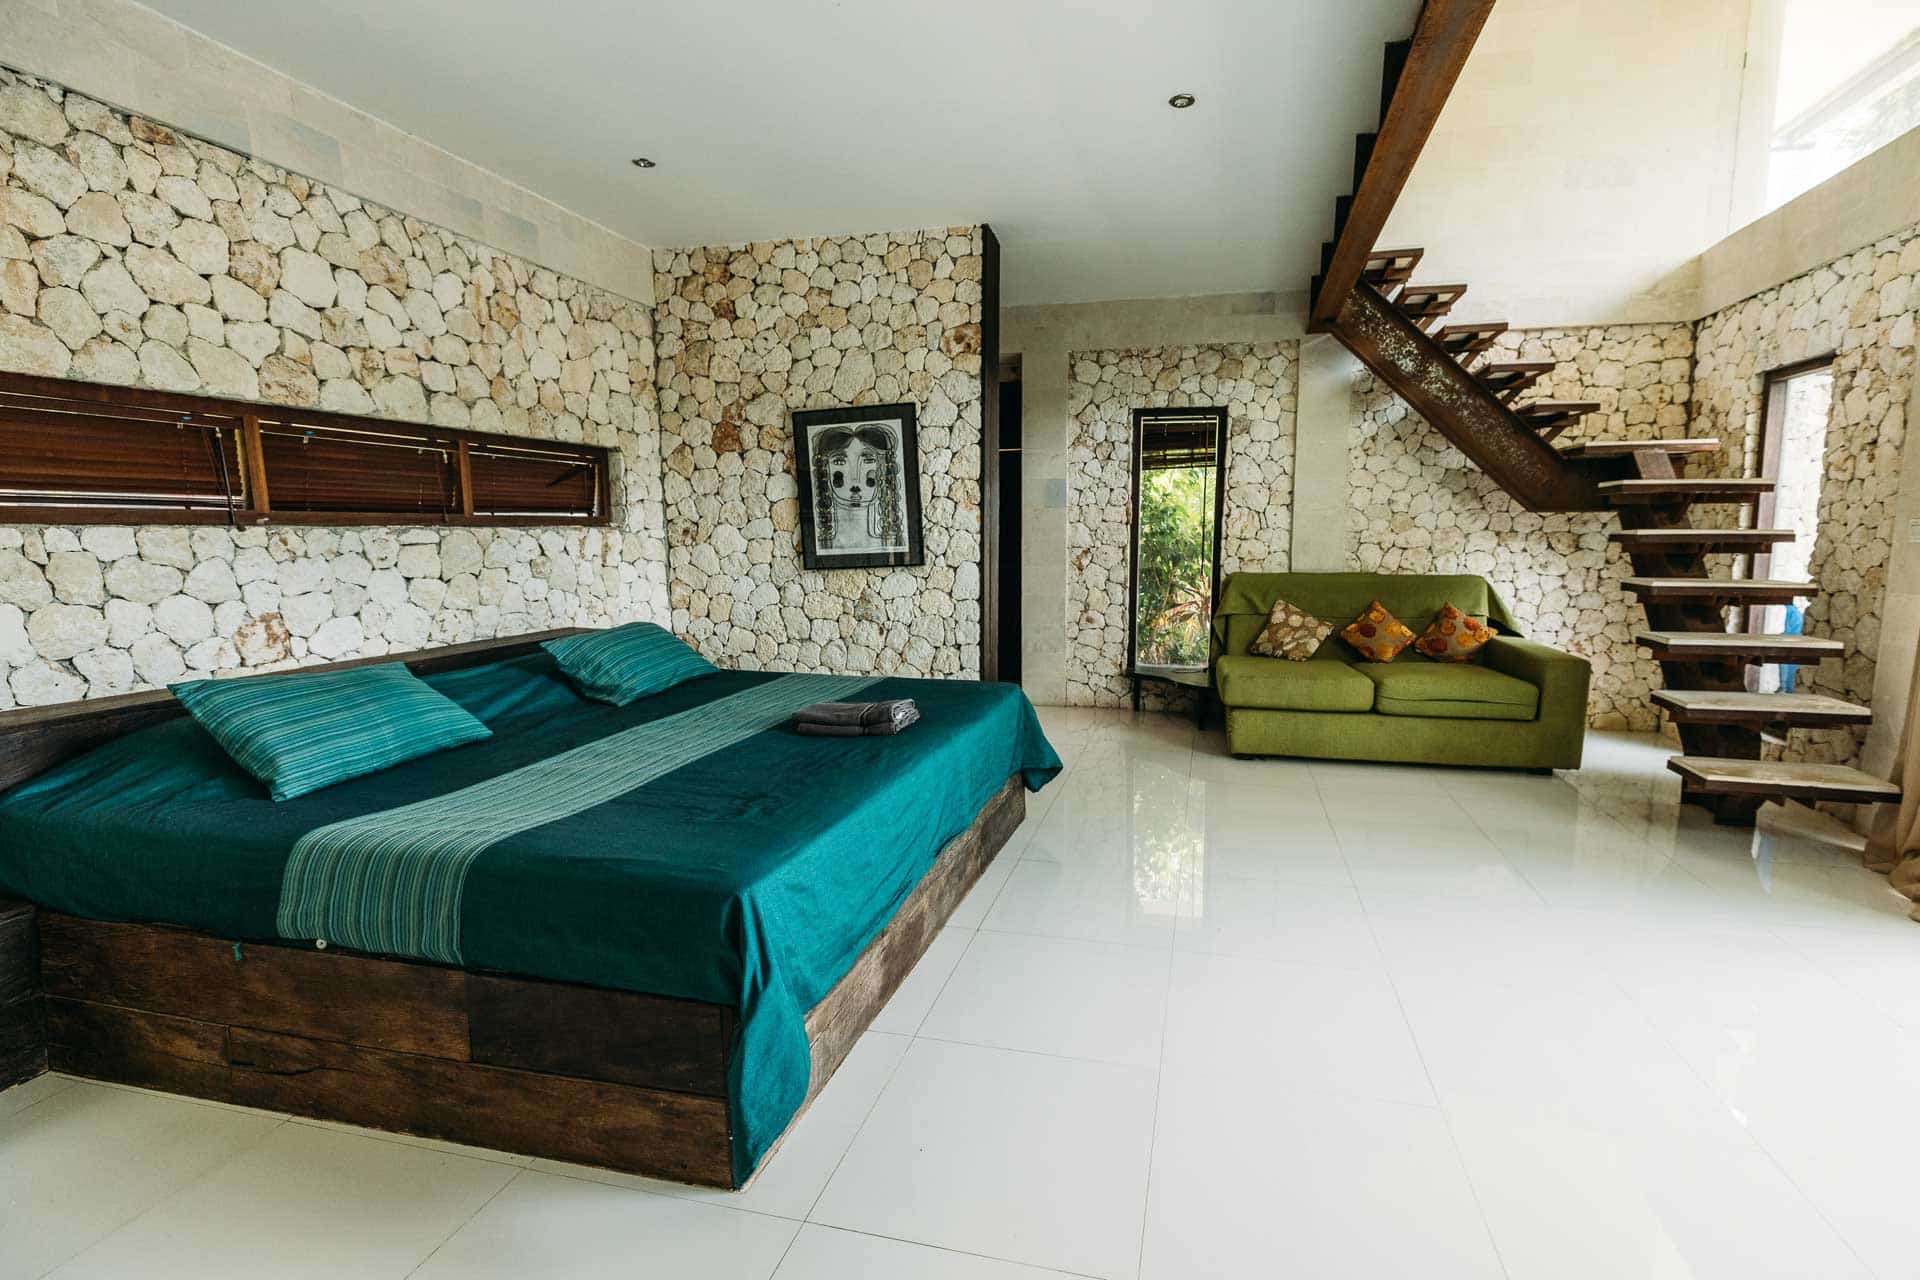 A room in hotel with stones for walls and green sofa and a king-size bed decorated in a rustic way